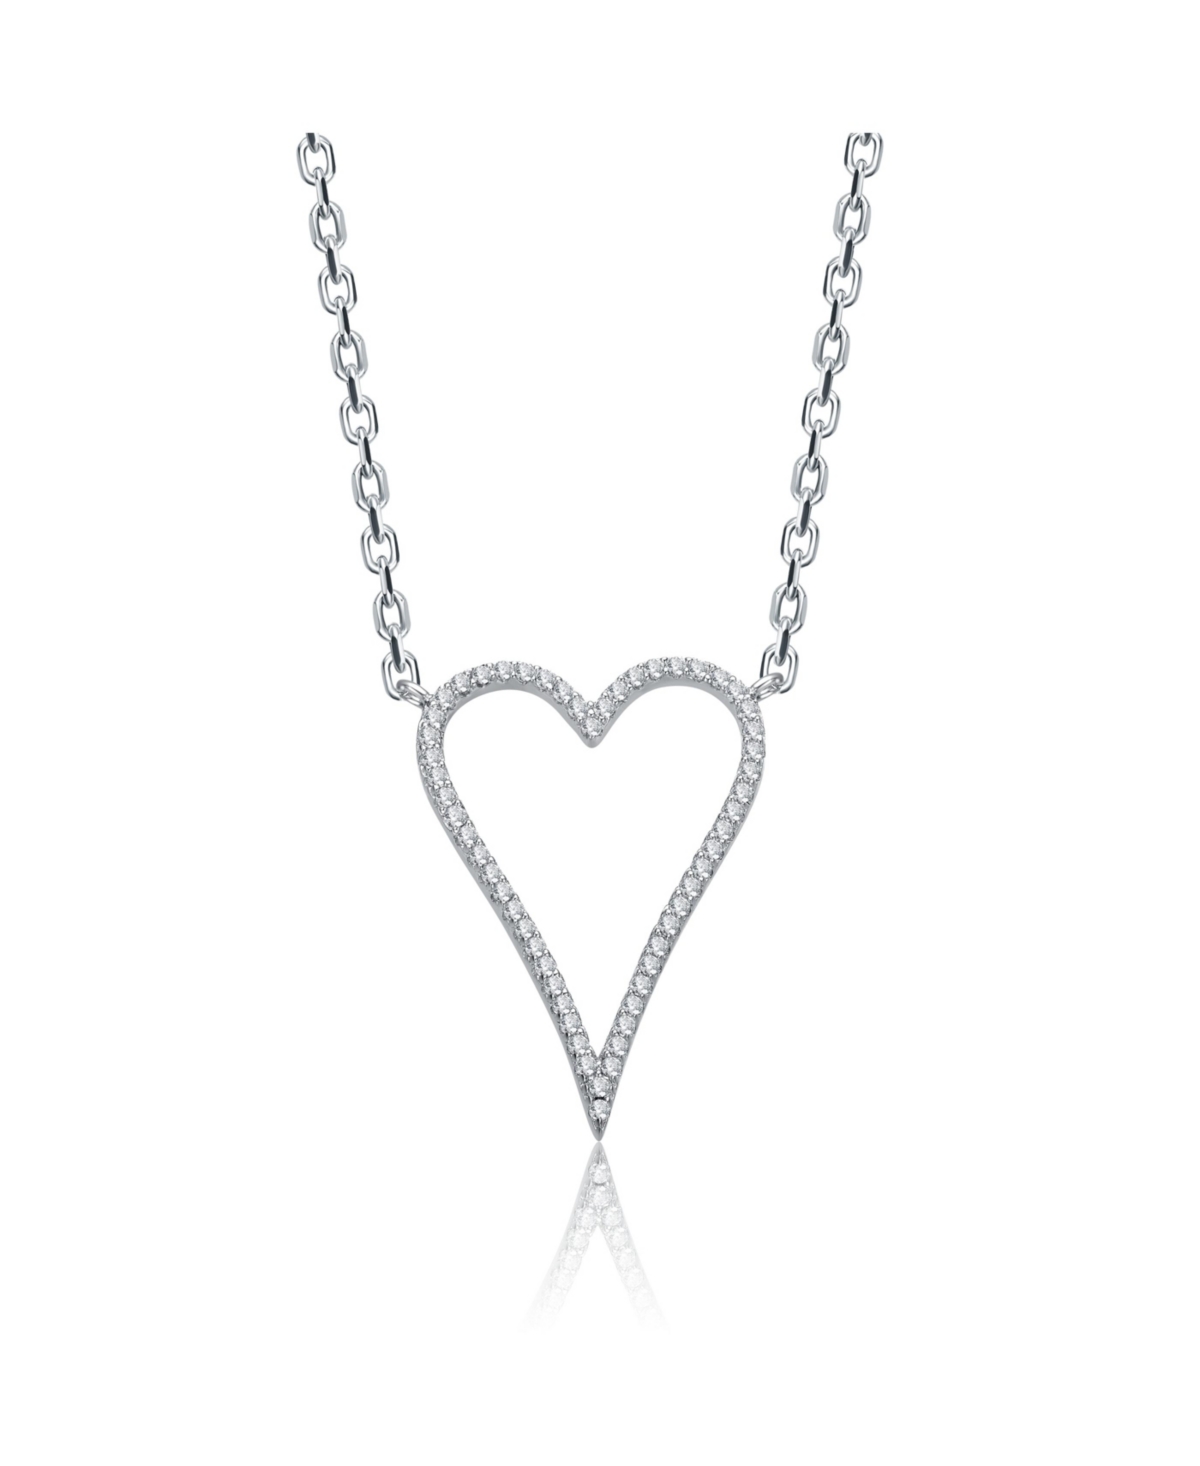 White Gold Plated with Cubic Zirconia Elongated Open Heart Halo Pendant Necklace - Silver